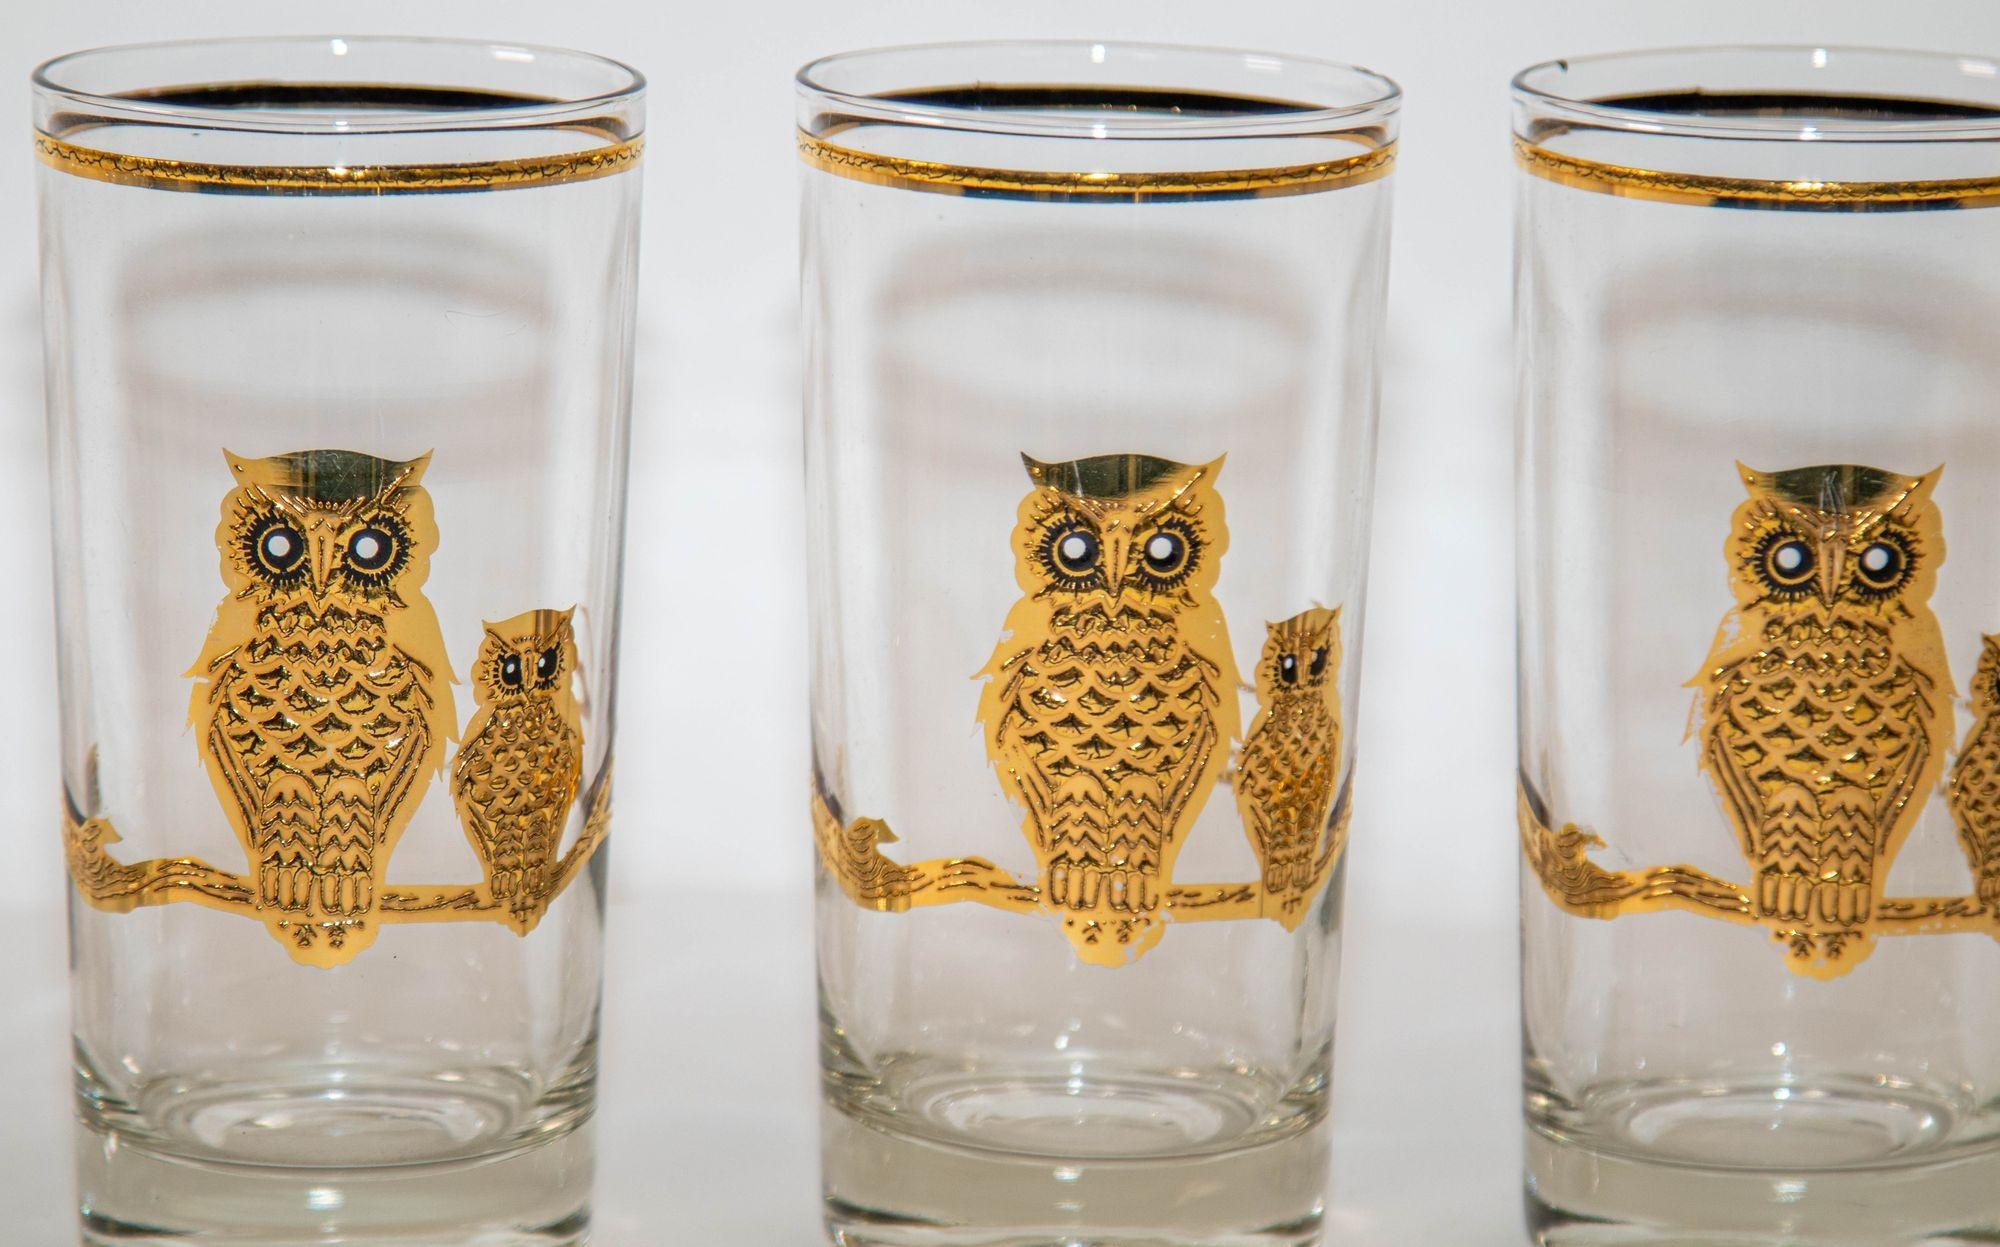 1950's Vintage Culver Ltd Highball Drinking Glasses with 22K Gold Owls Set of 6 In Good Condition For Sale In North Hollywood, CA